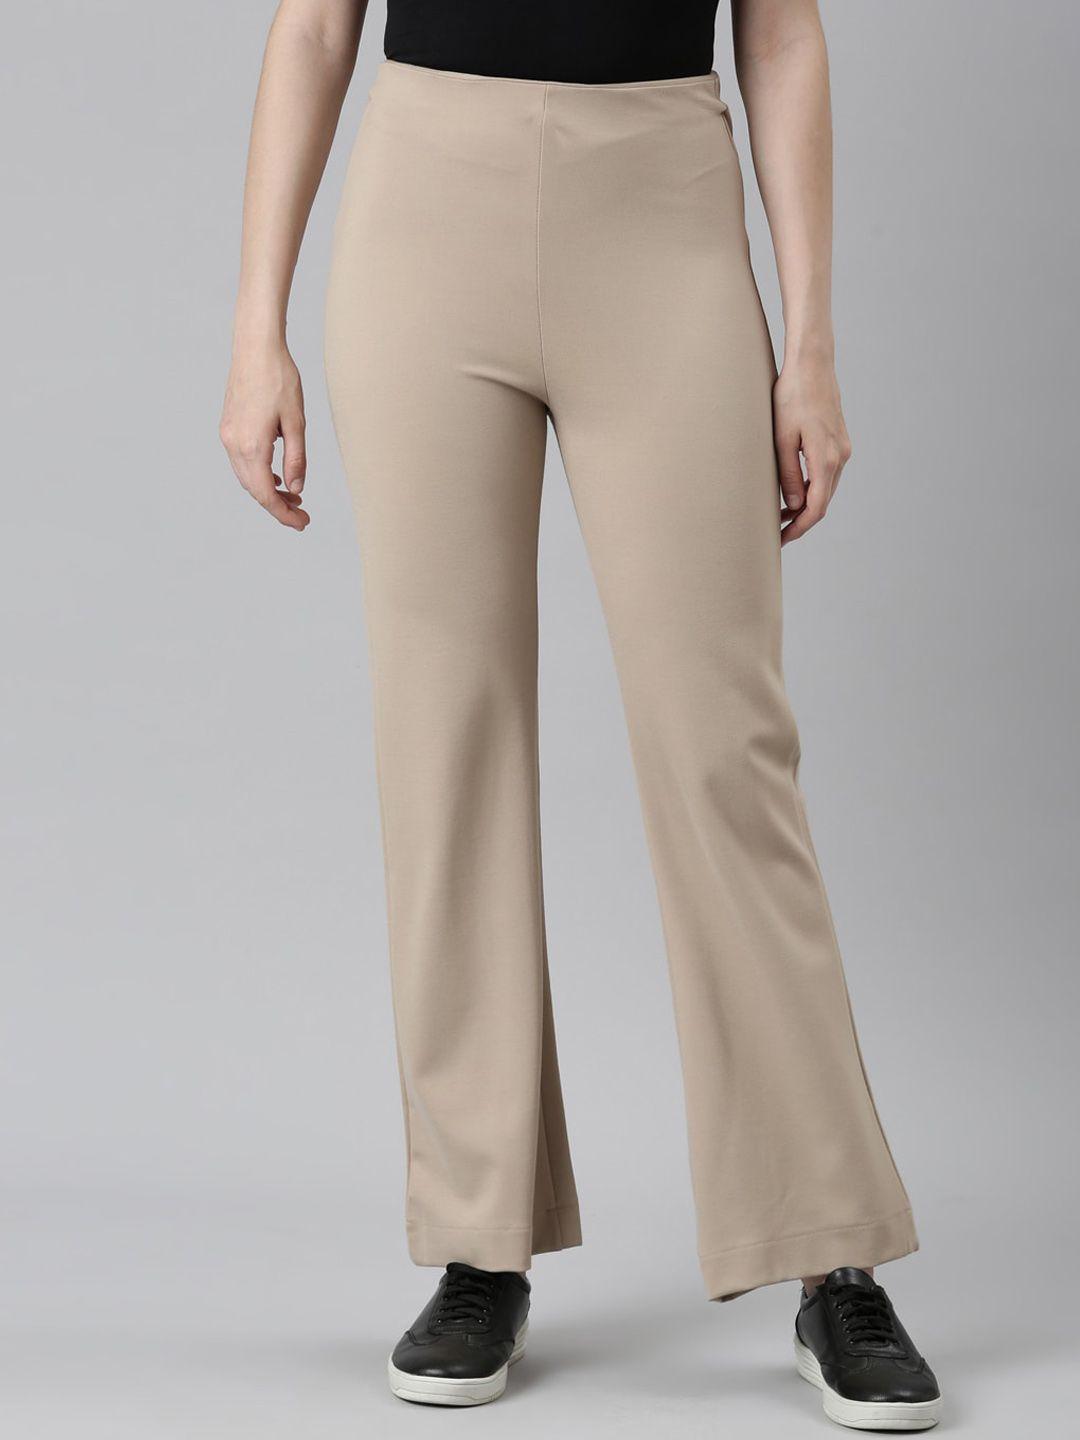 go-colors-women-relaxed-flared-high-rise-trousers